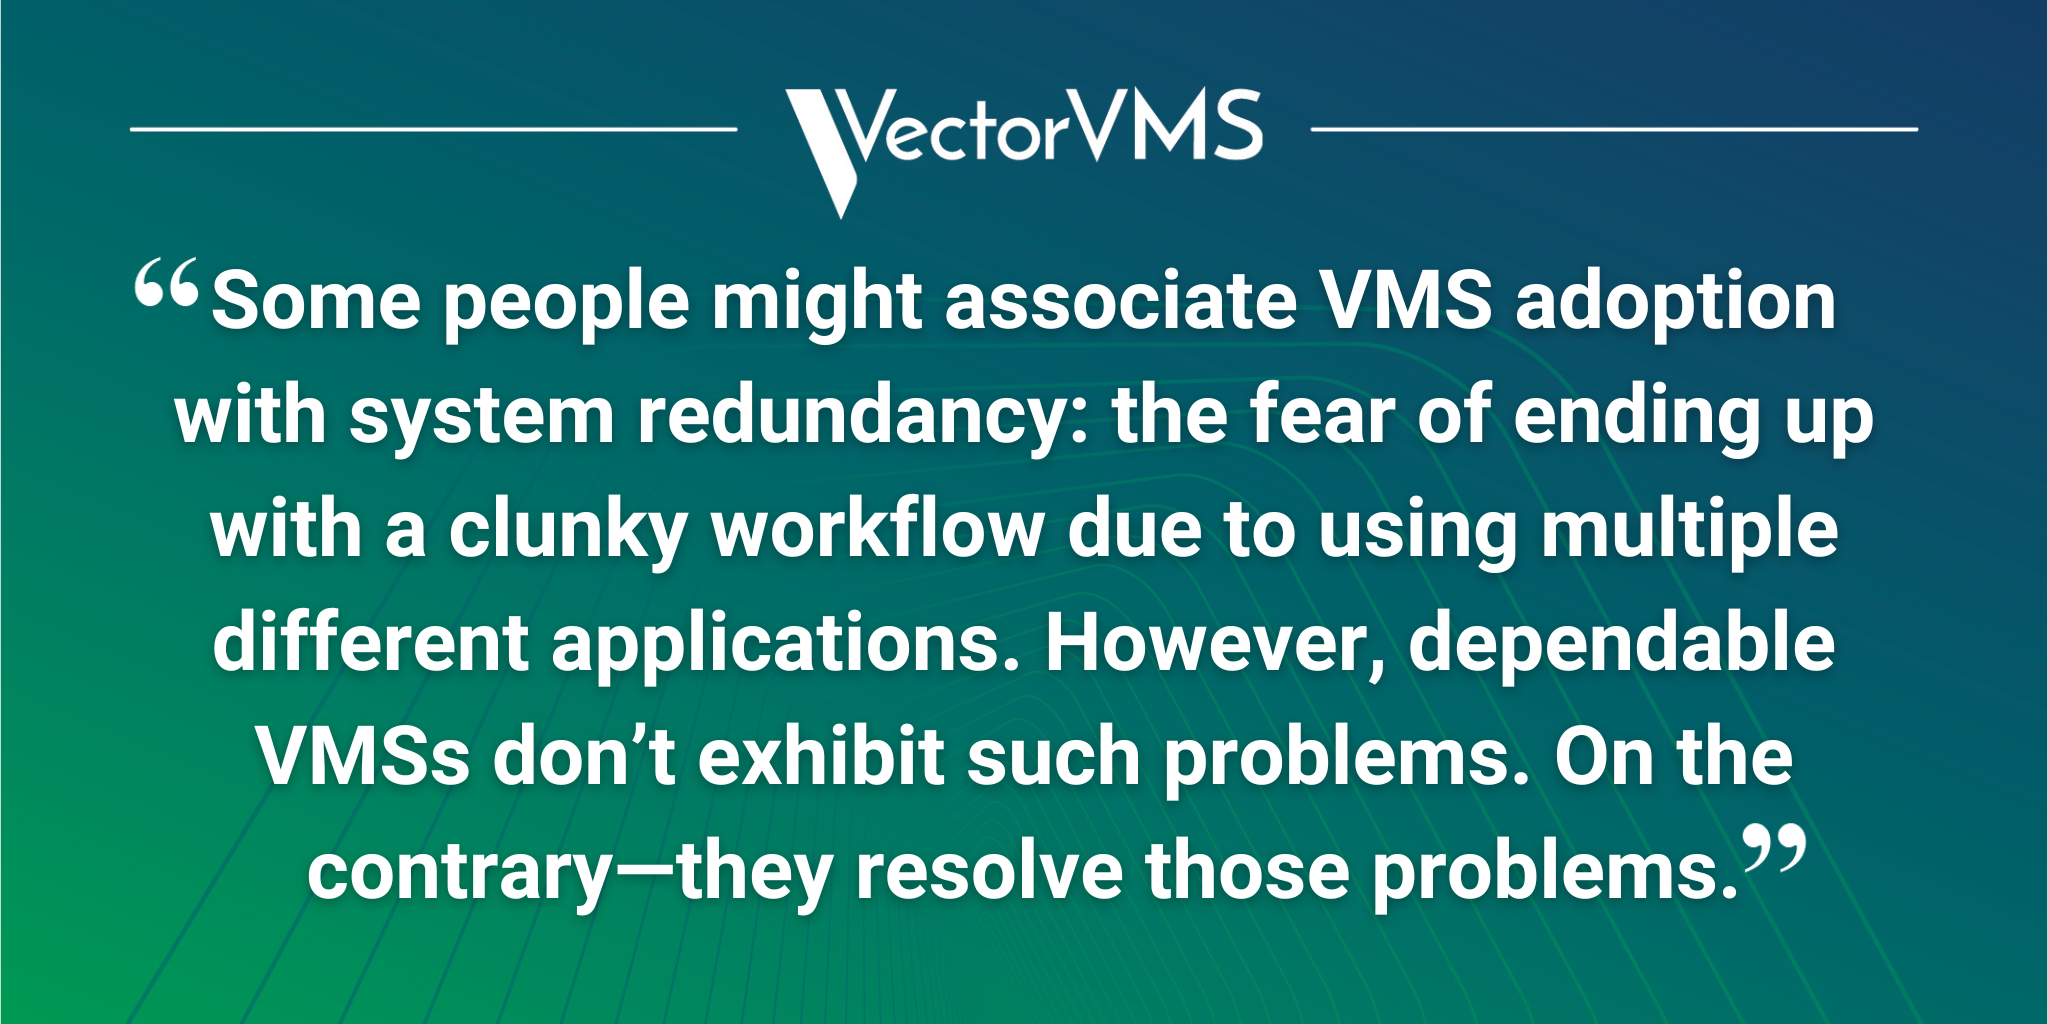 Some people might associate VMS adoption with system redundancy: the fear of ending up with a clunky workflow due to using multiple different applications. However, dependable VMSs don’t exhibit such problems. On the contrary—they resolve those problems.